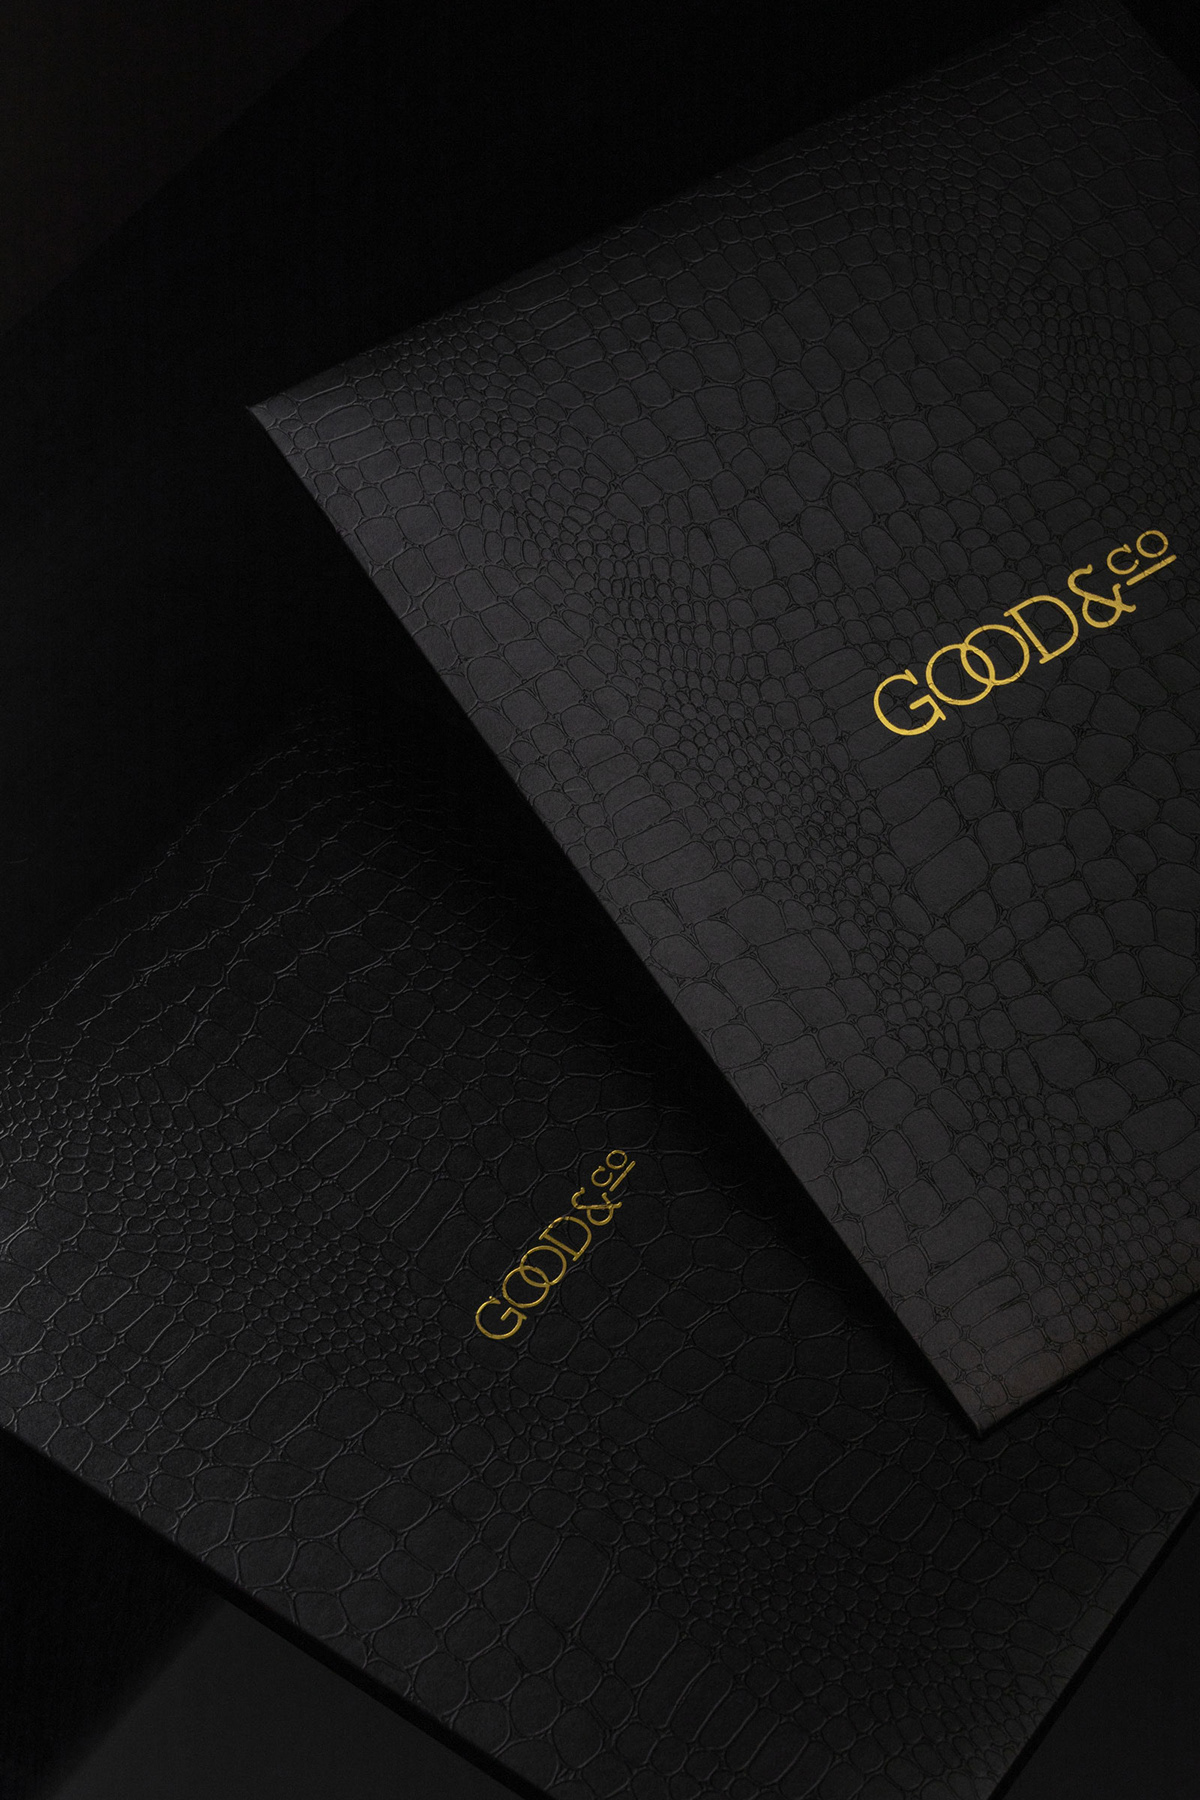 Two black envelopes with all over reptile texture and gold logo detailing